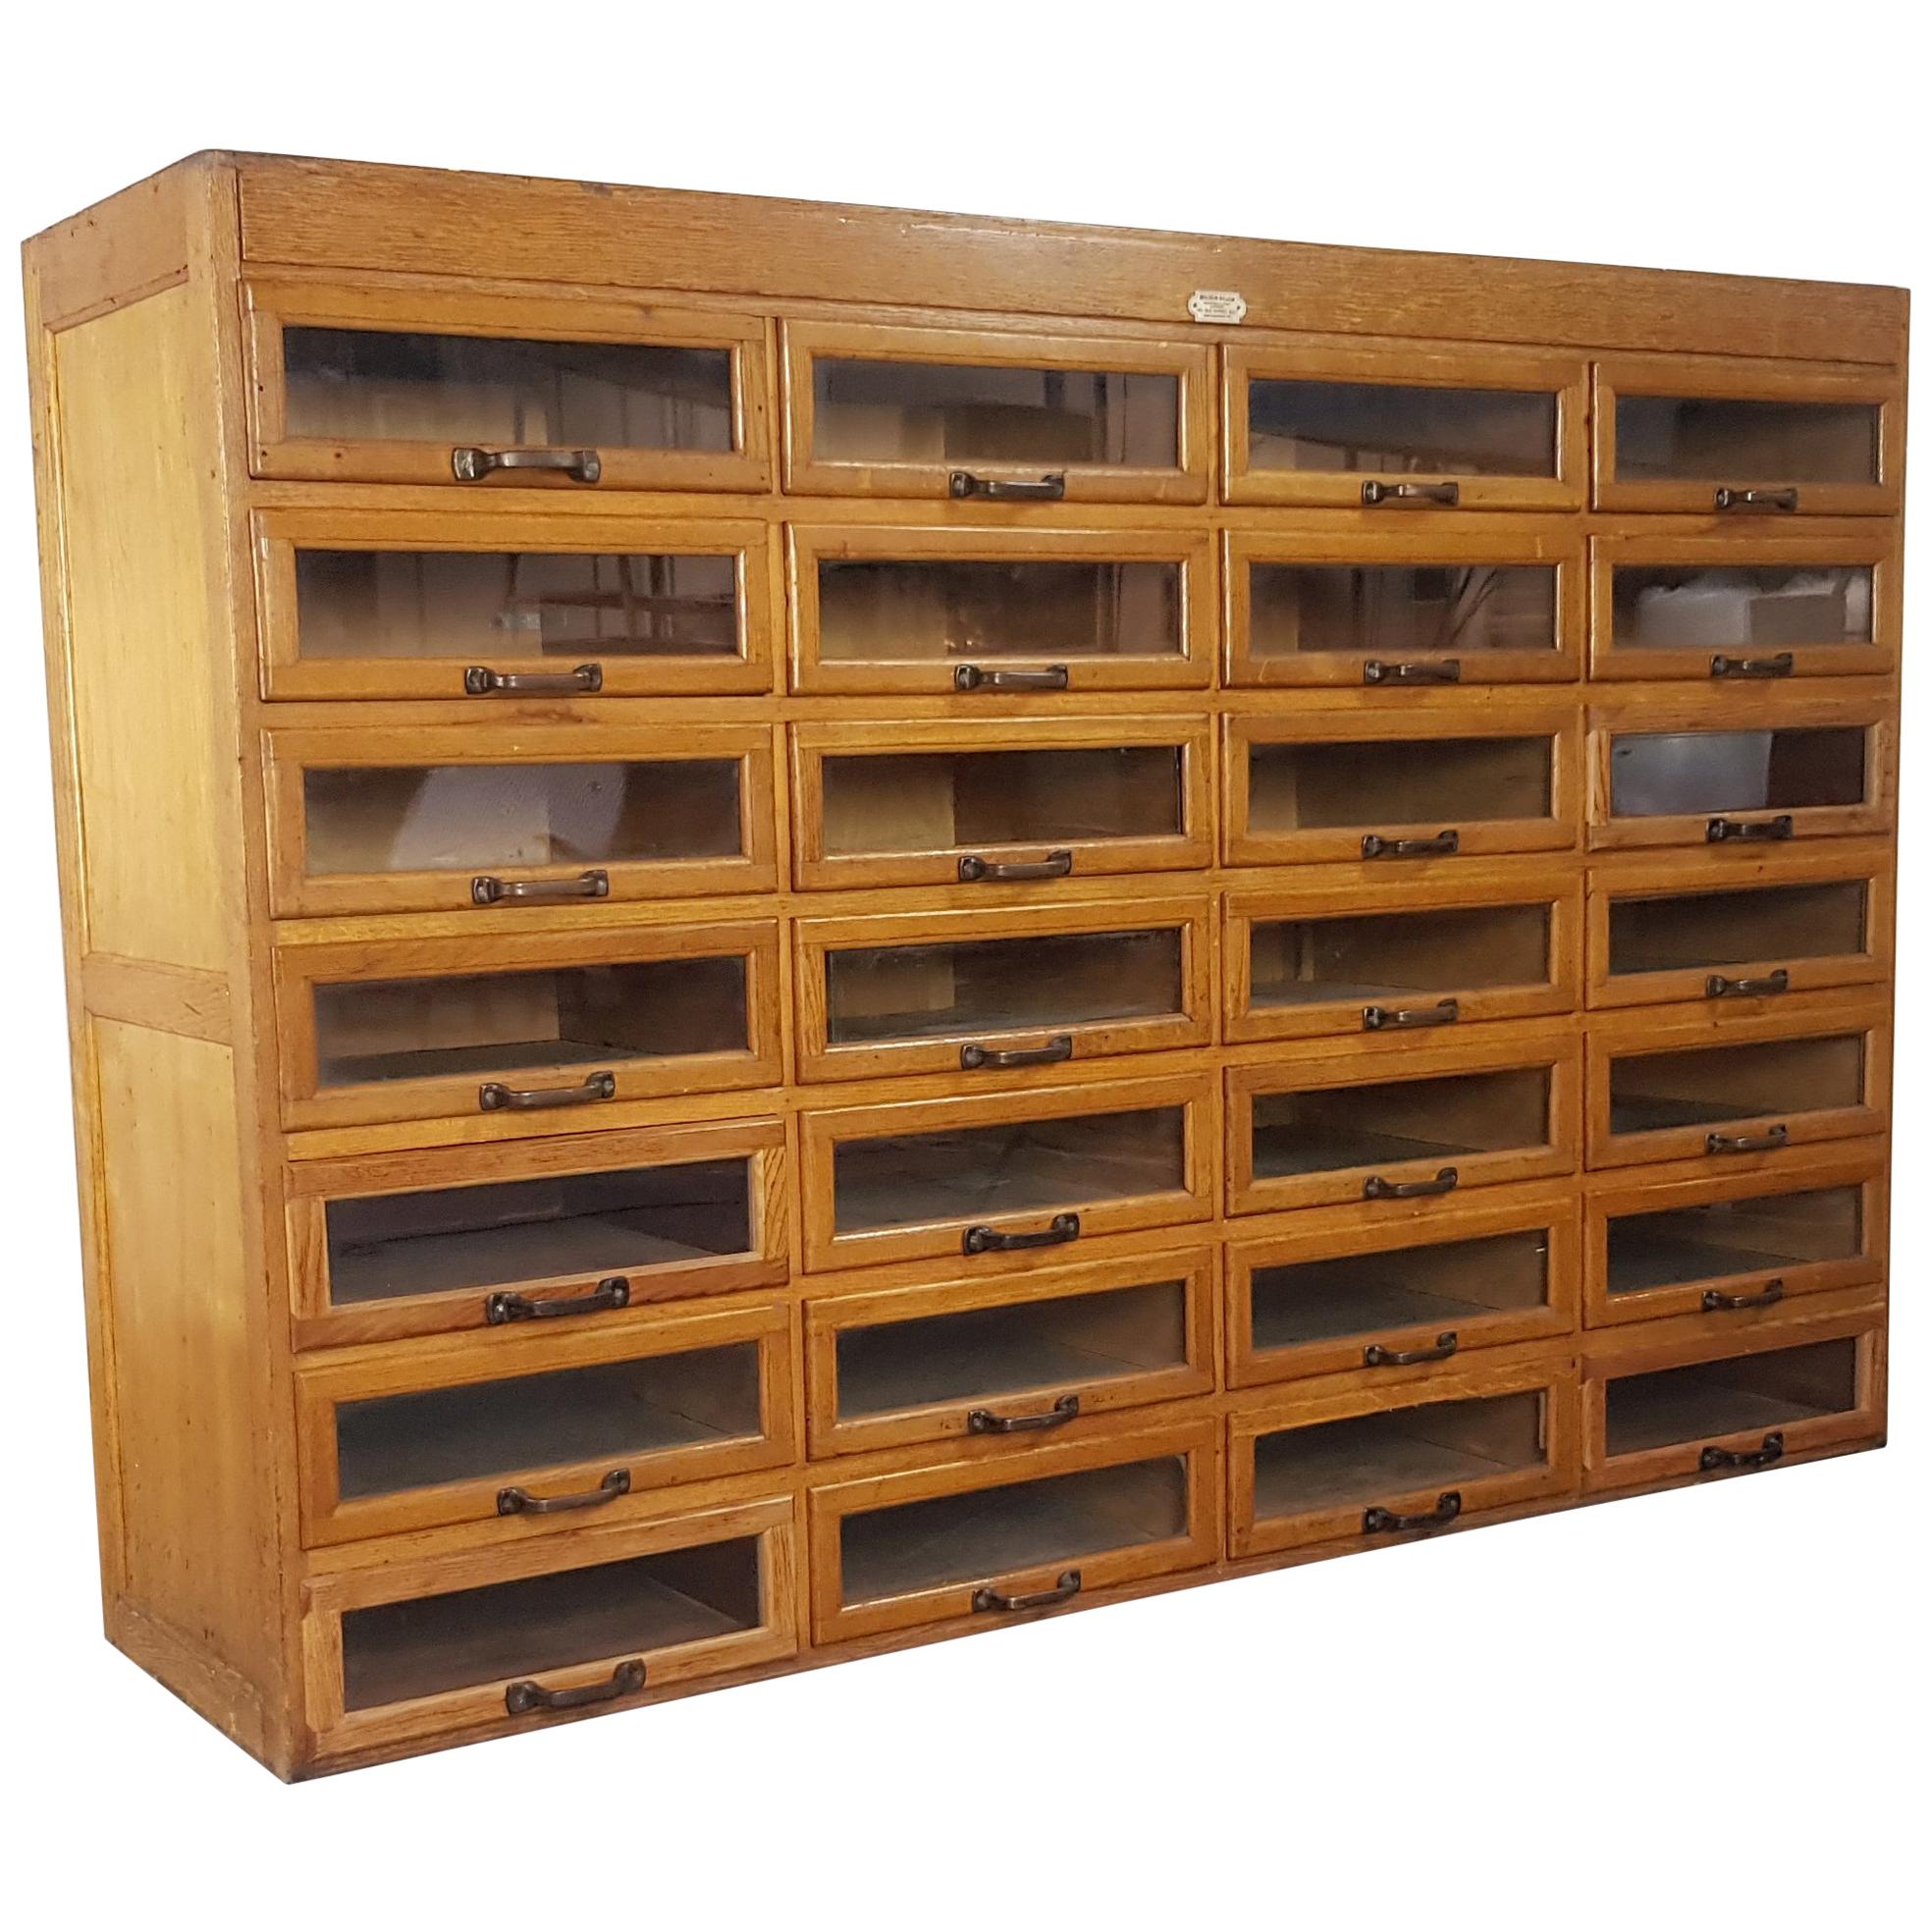 Early 20th Century 28-Drawer English Haberdashery Cabinet For Sale